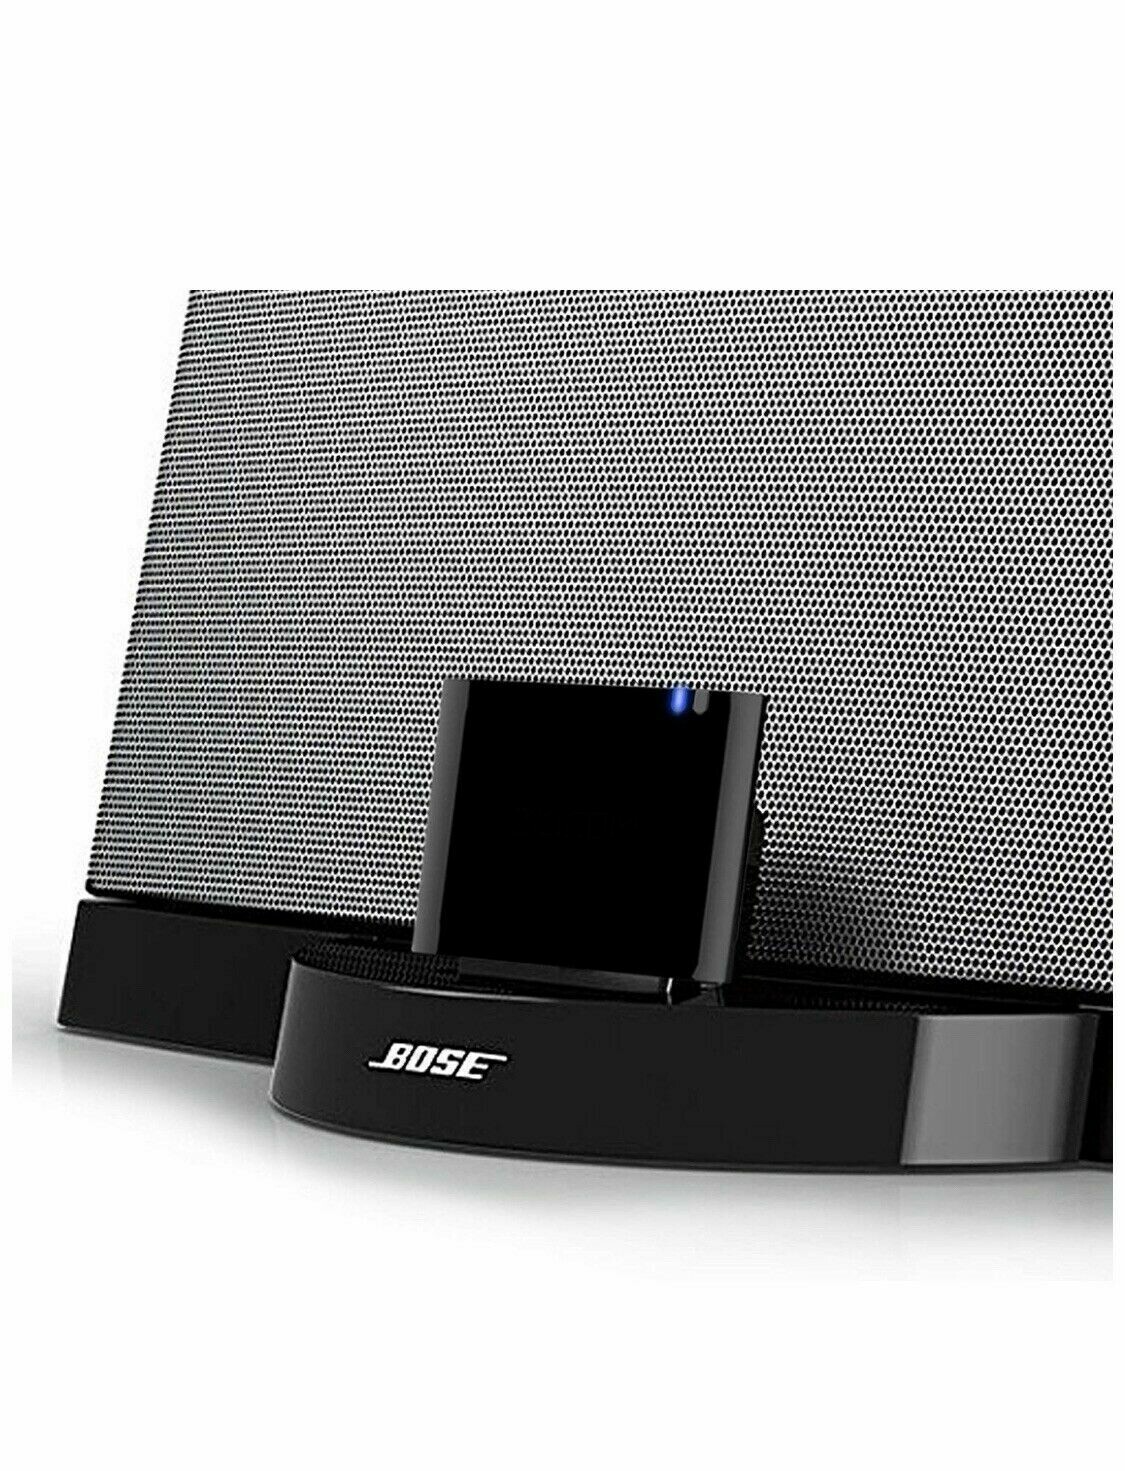 Bluetooth Adapter for Bose Sounddock II or Sounddock Portable